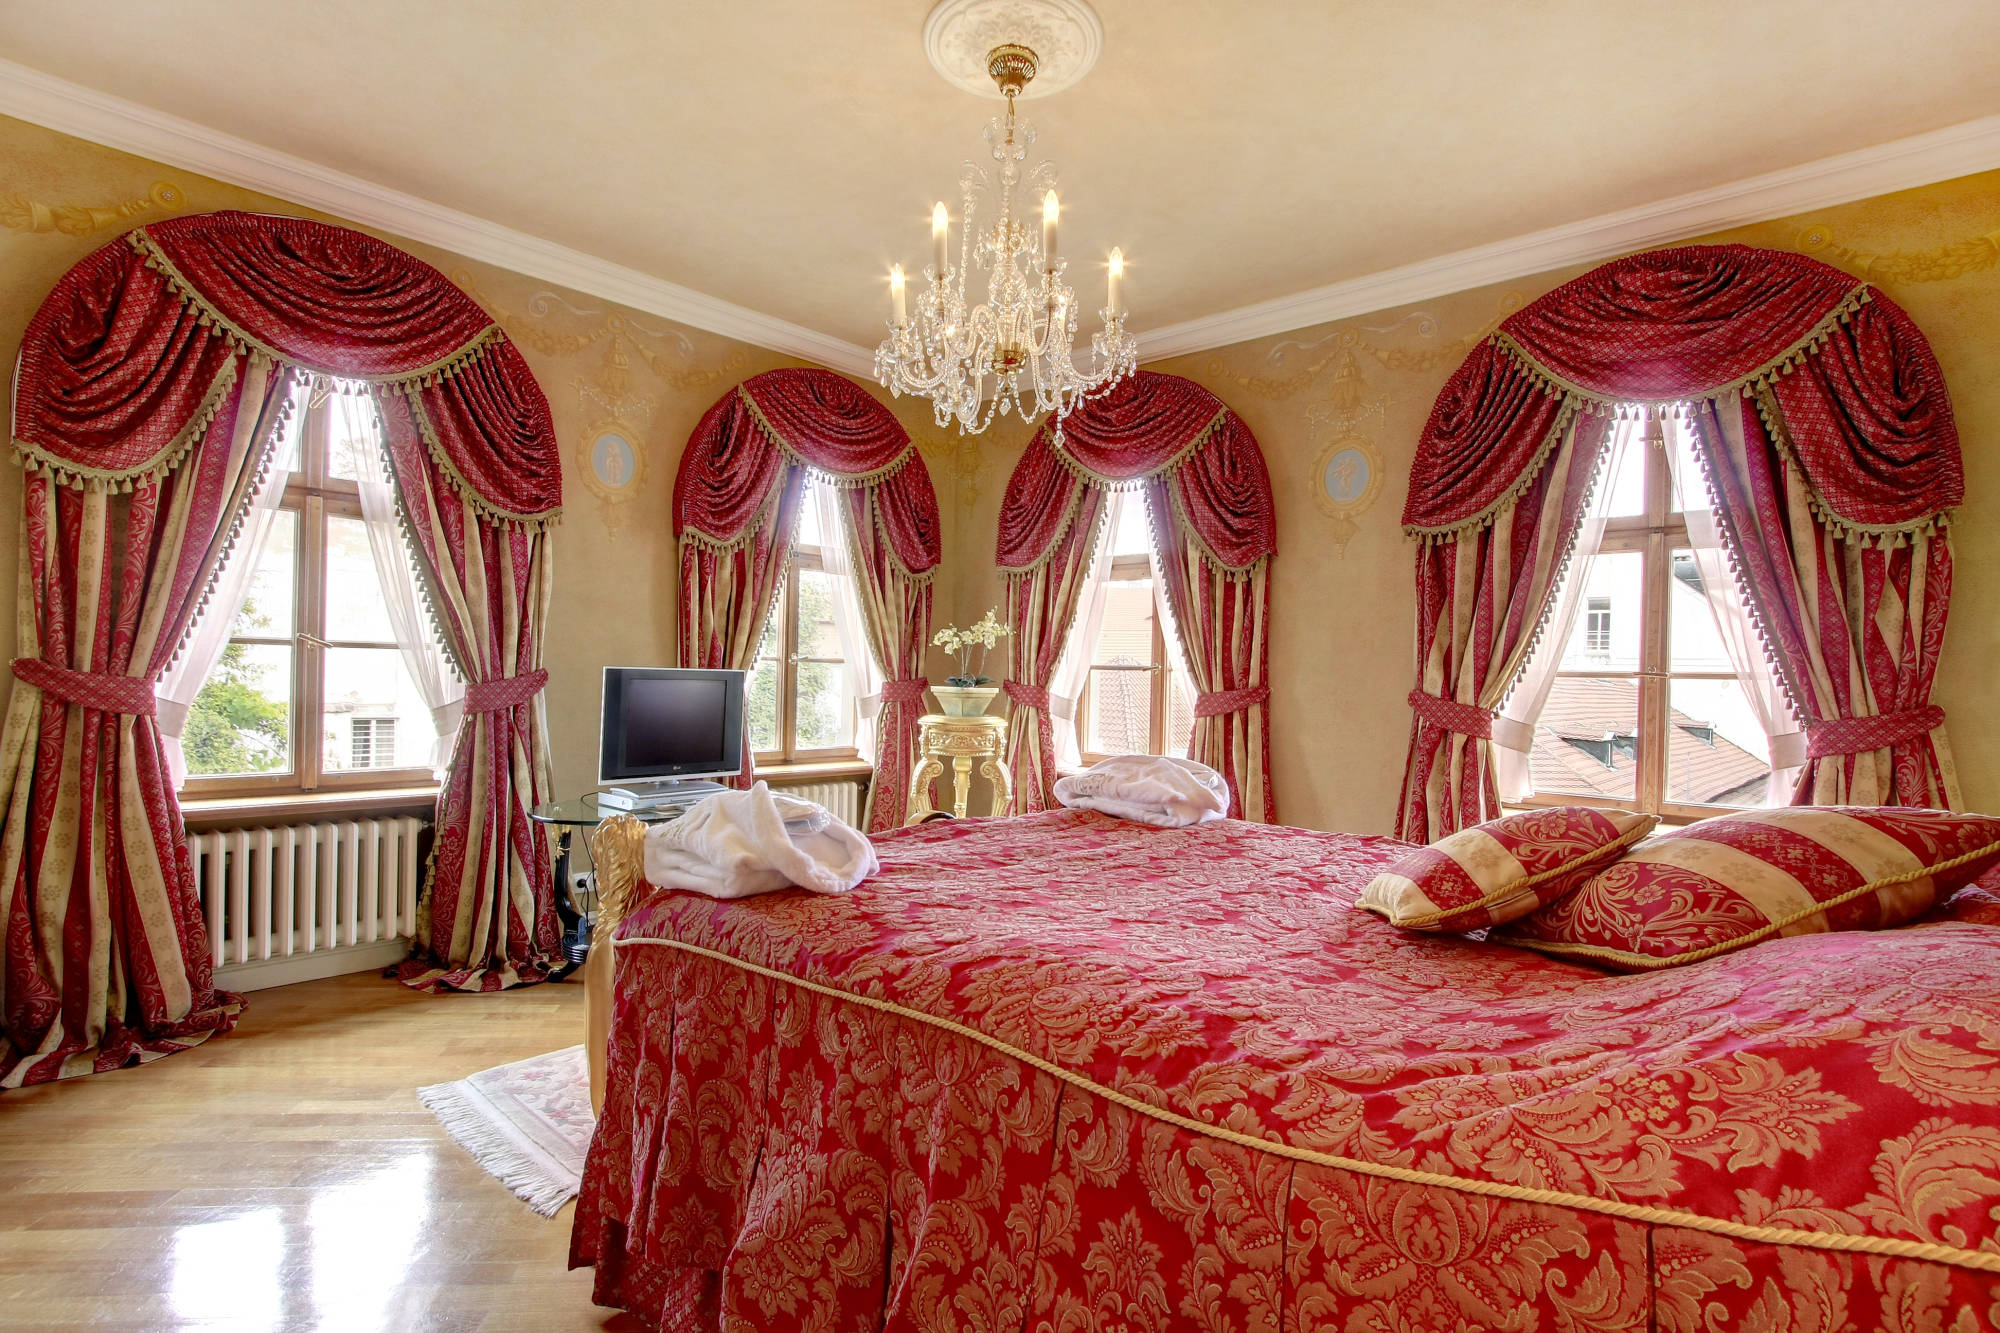 Room in chateau style in the Alchymist Grand Hotel and Spa